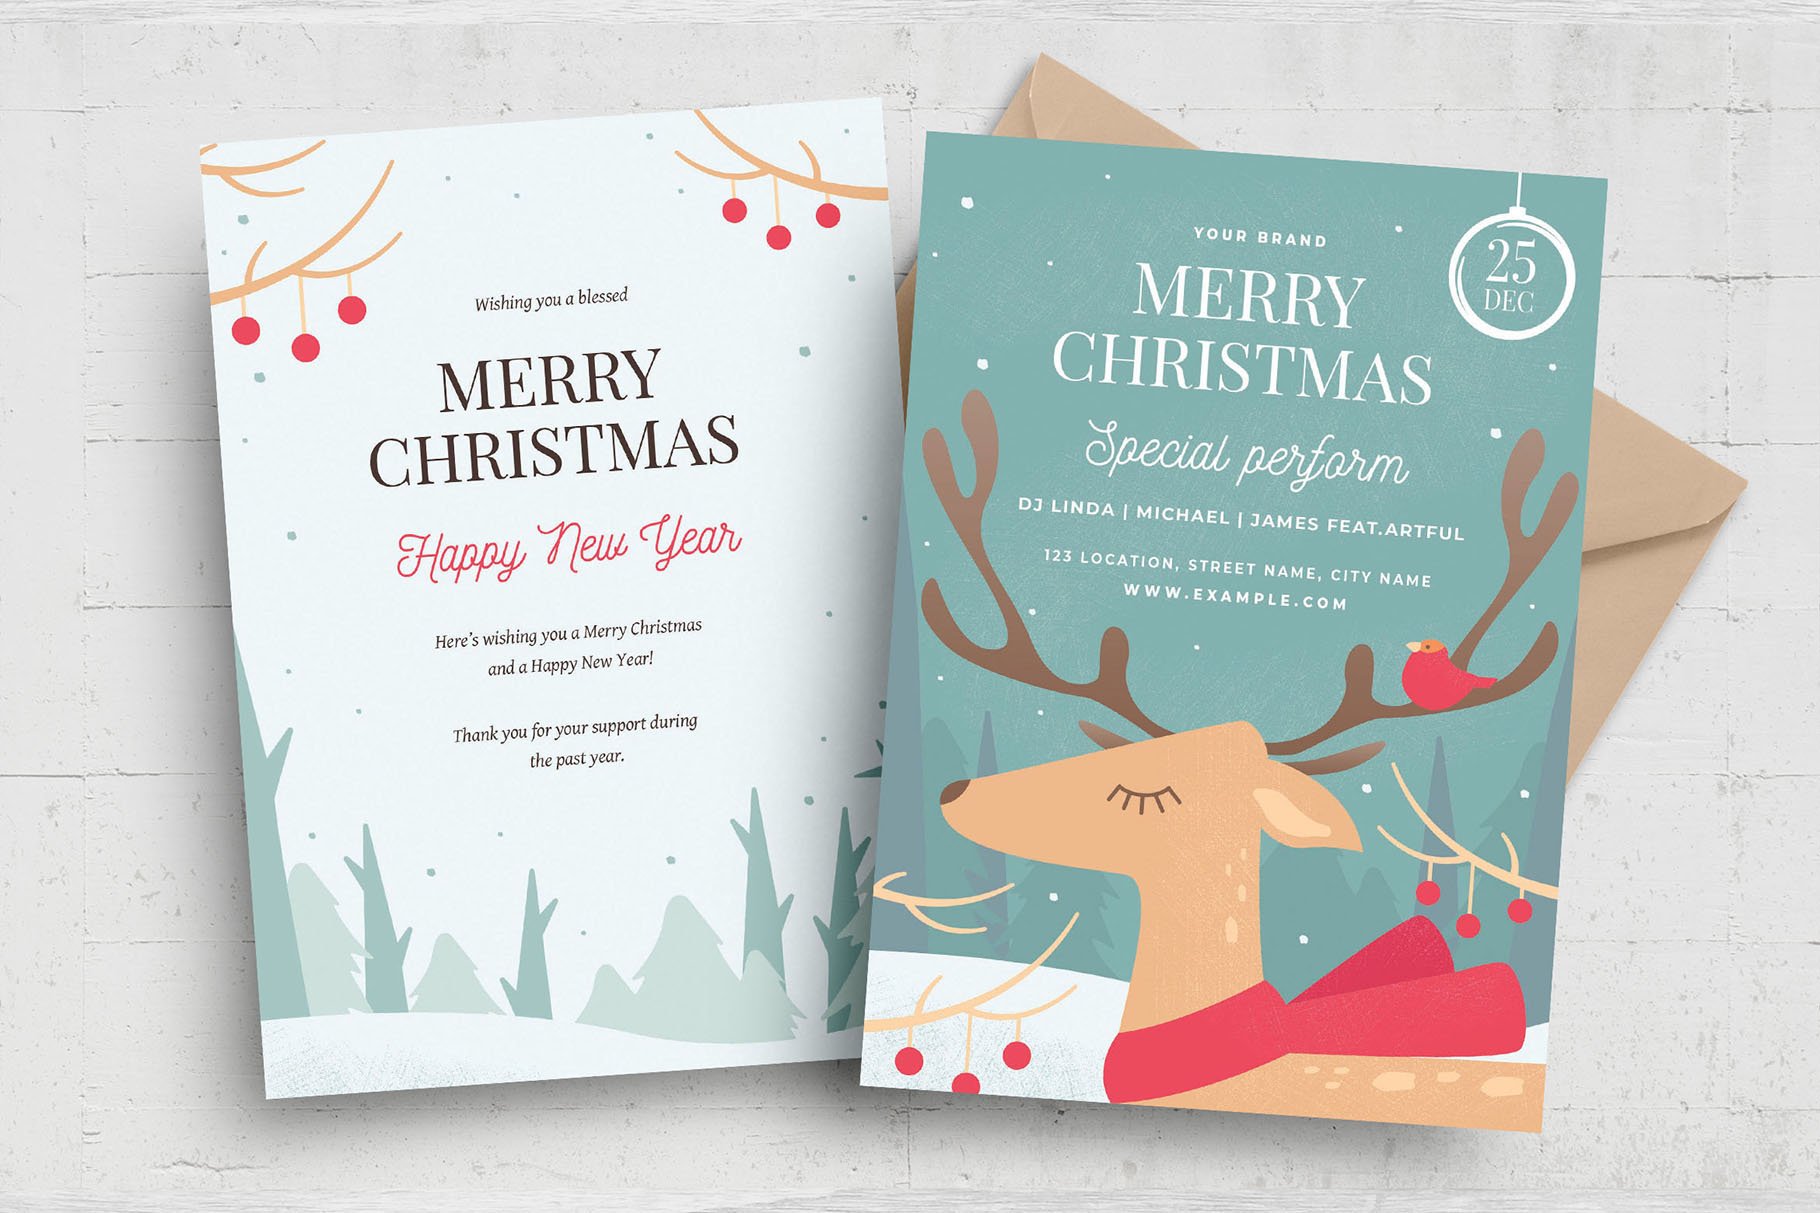 Merry Christmas Greetings Cards cover image.